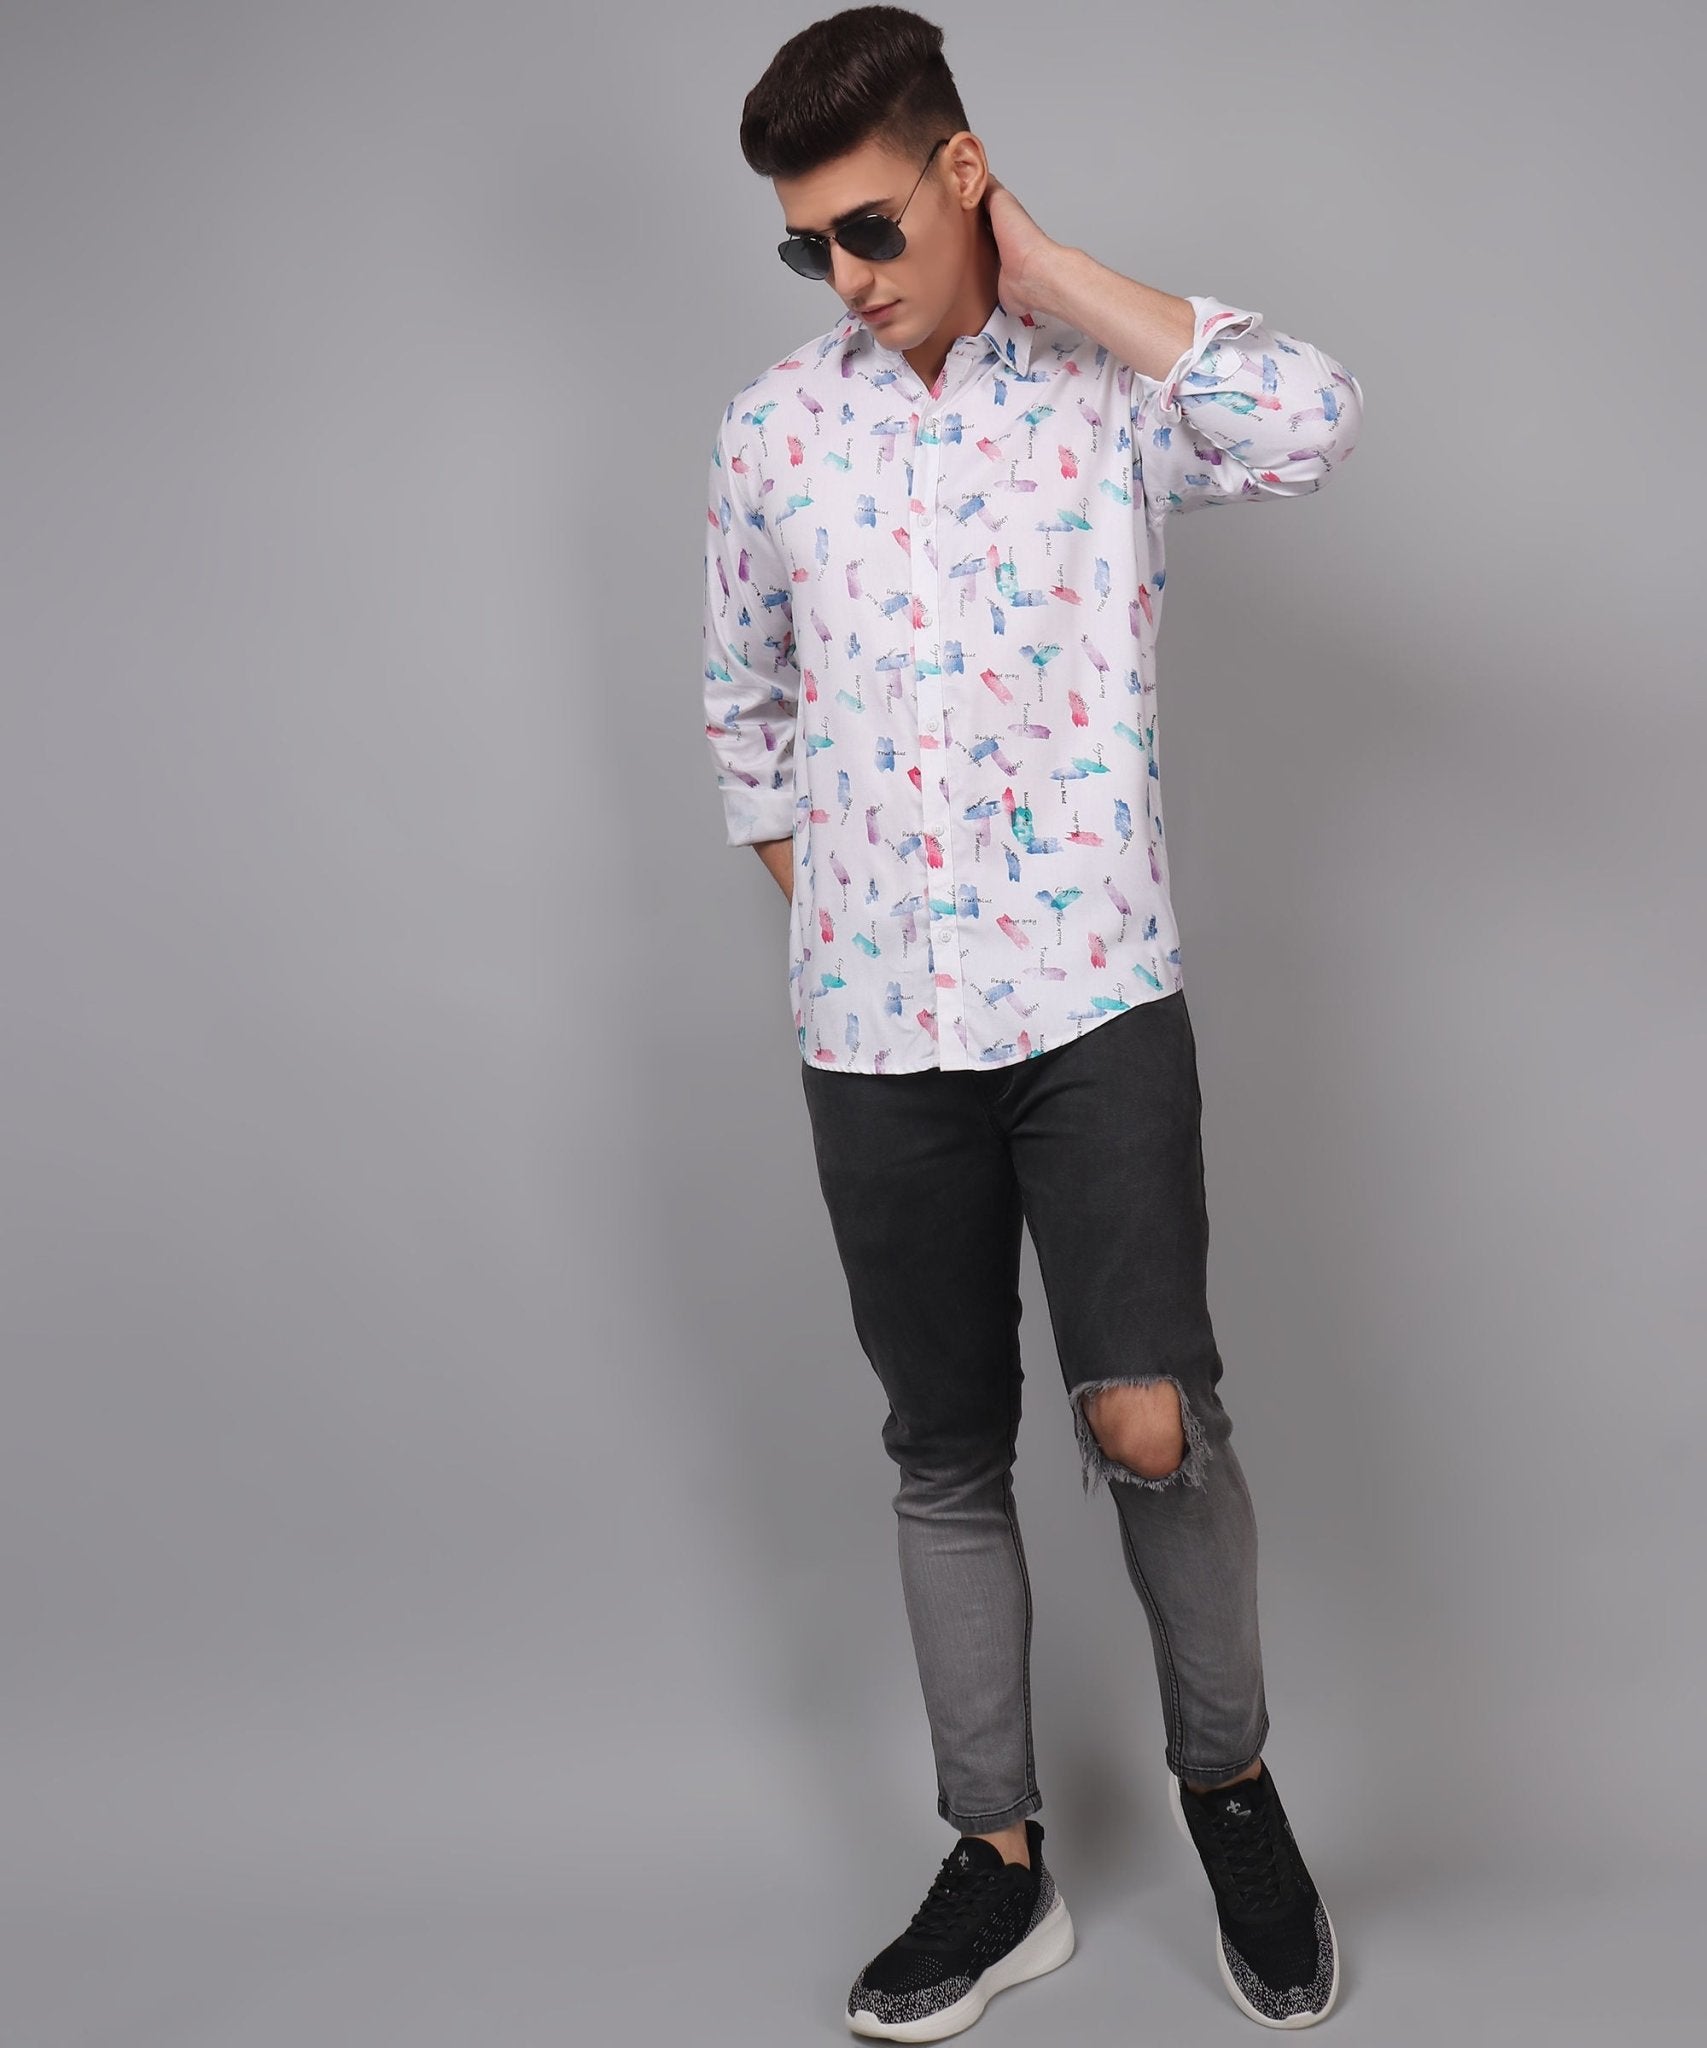 Trybuy Premium Glamorous Printed Multi Colored Cotton Casual Shirt for Men - TryBuy® USA🇺🇸